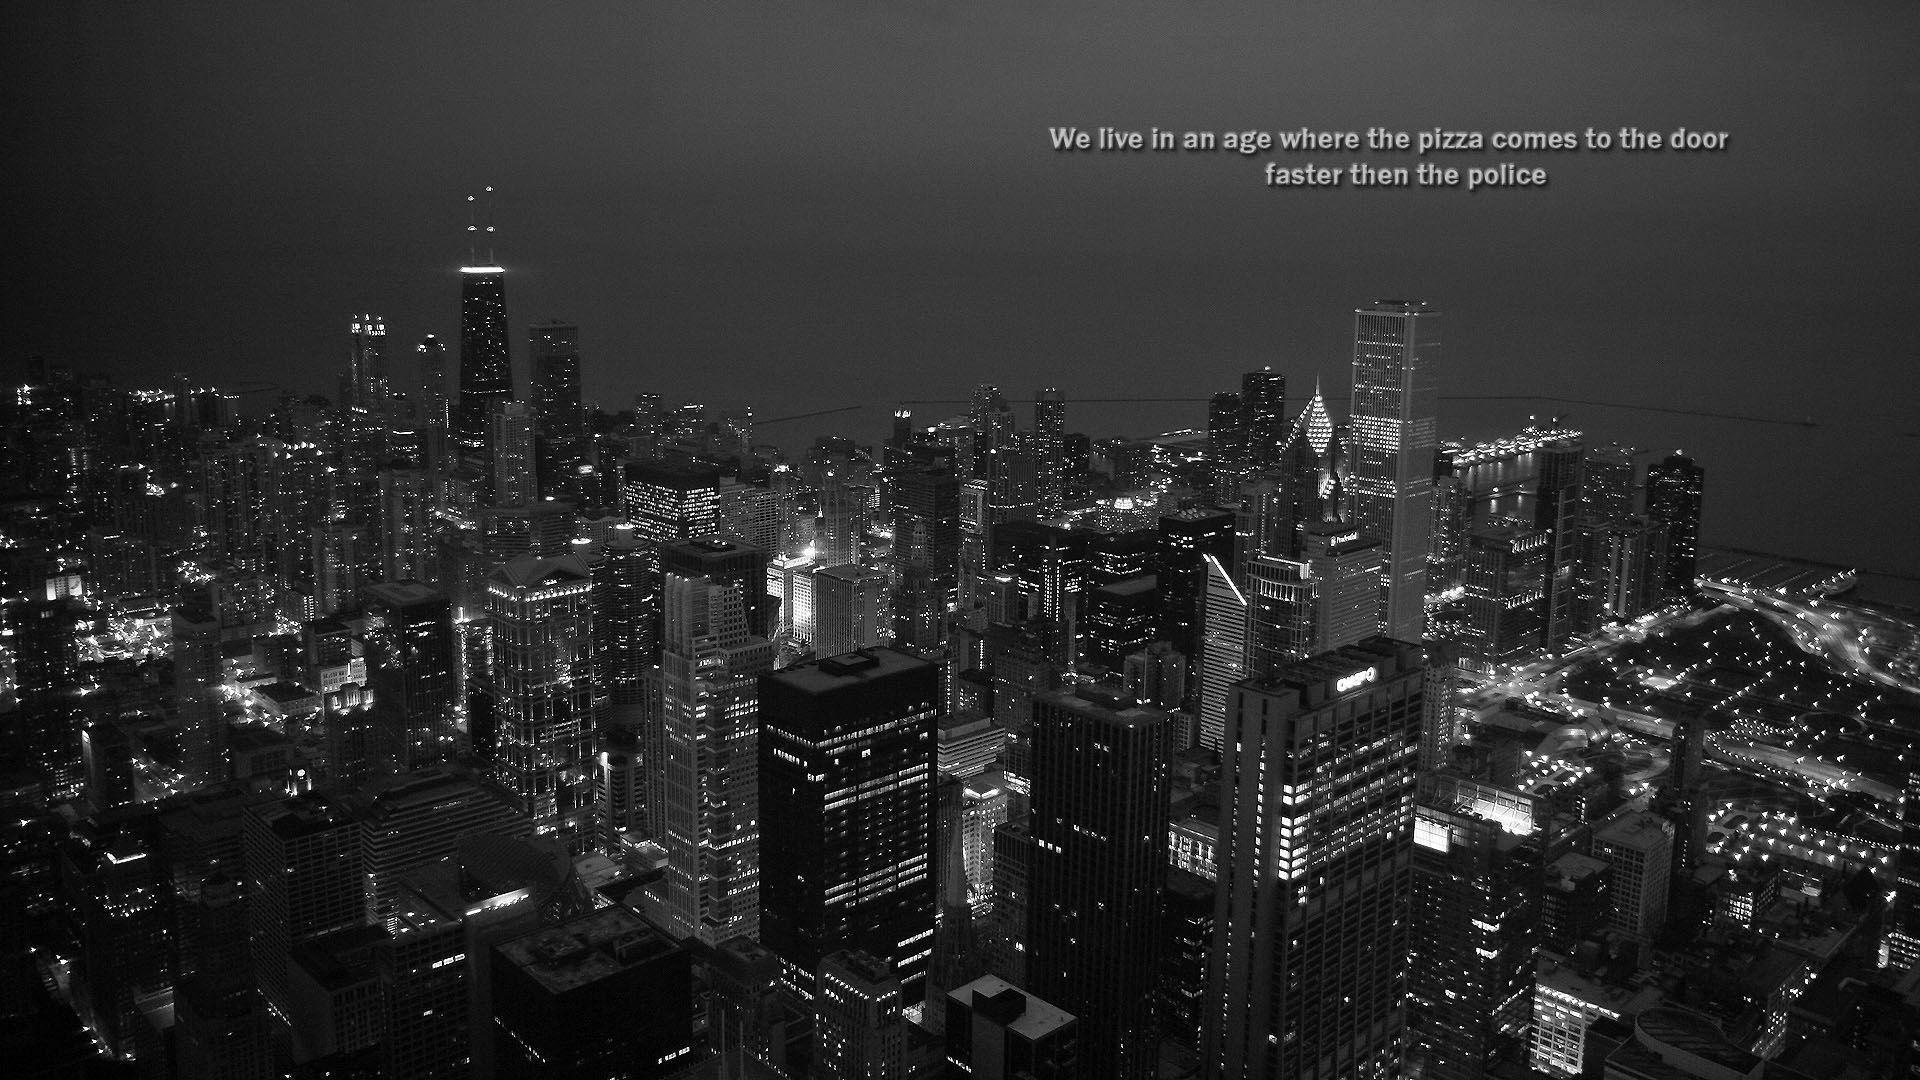 The Image of Chicago Fresh HD Wallpaper on TurnLOL HD